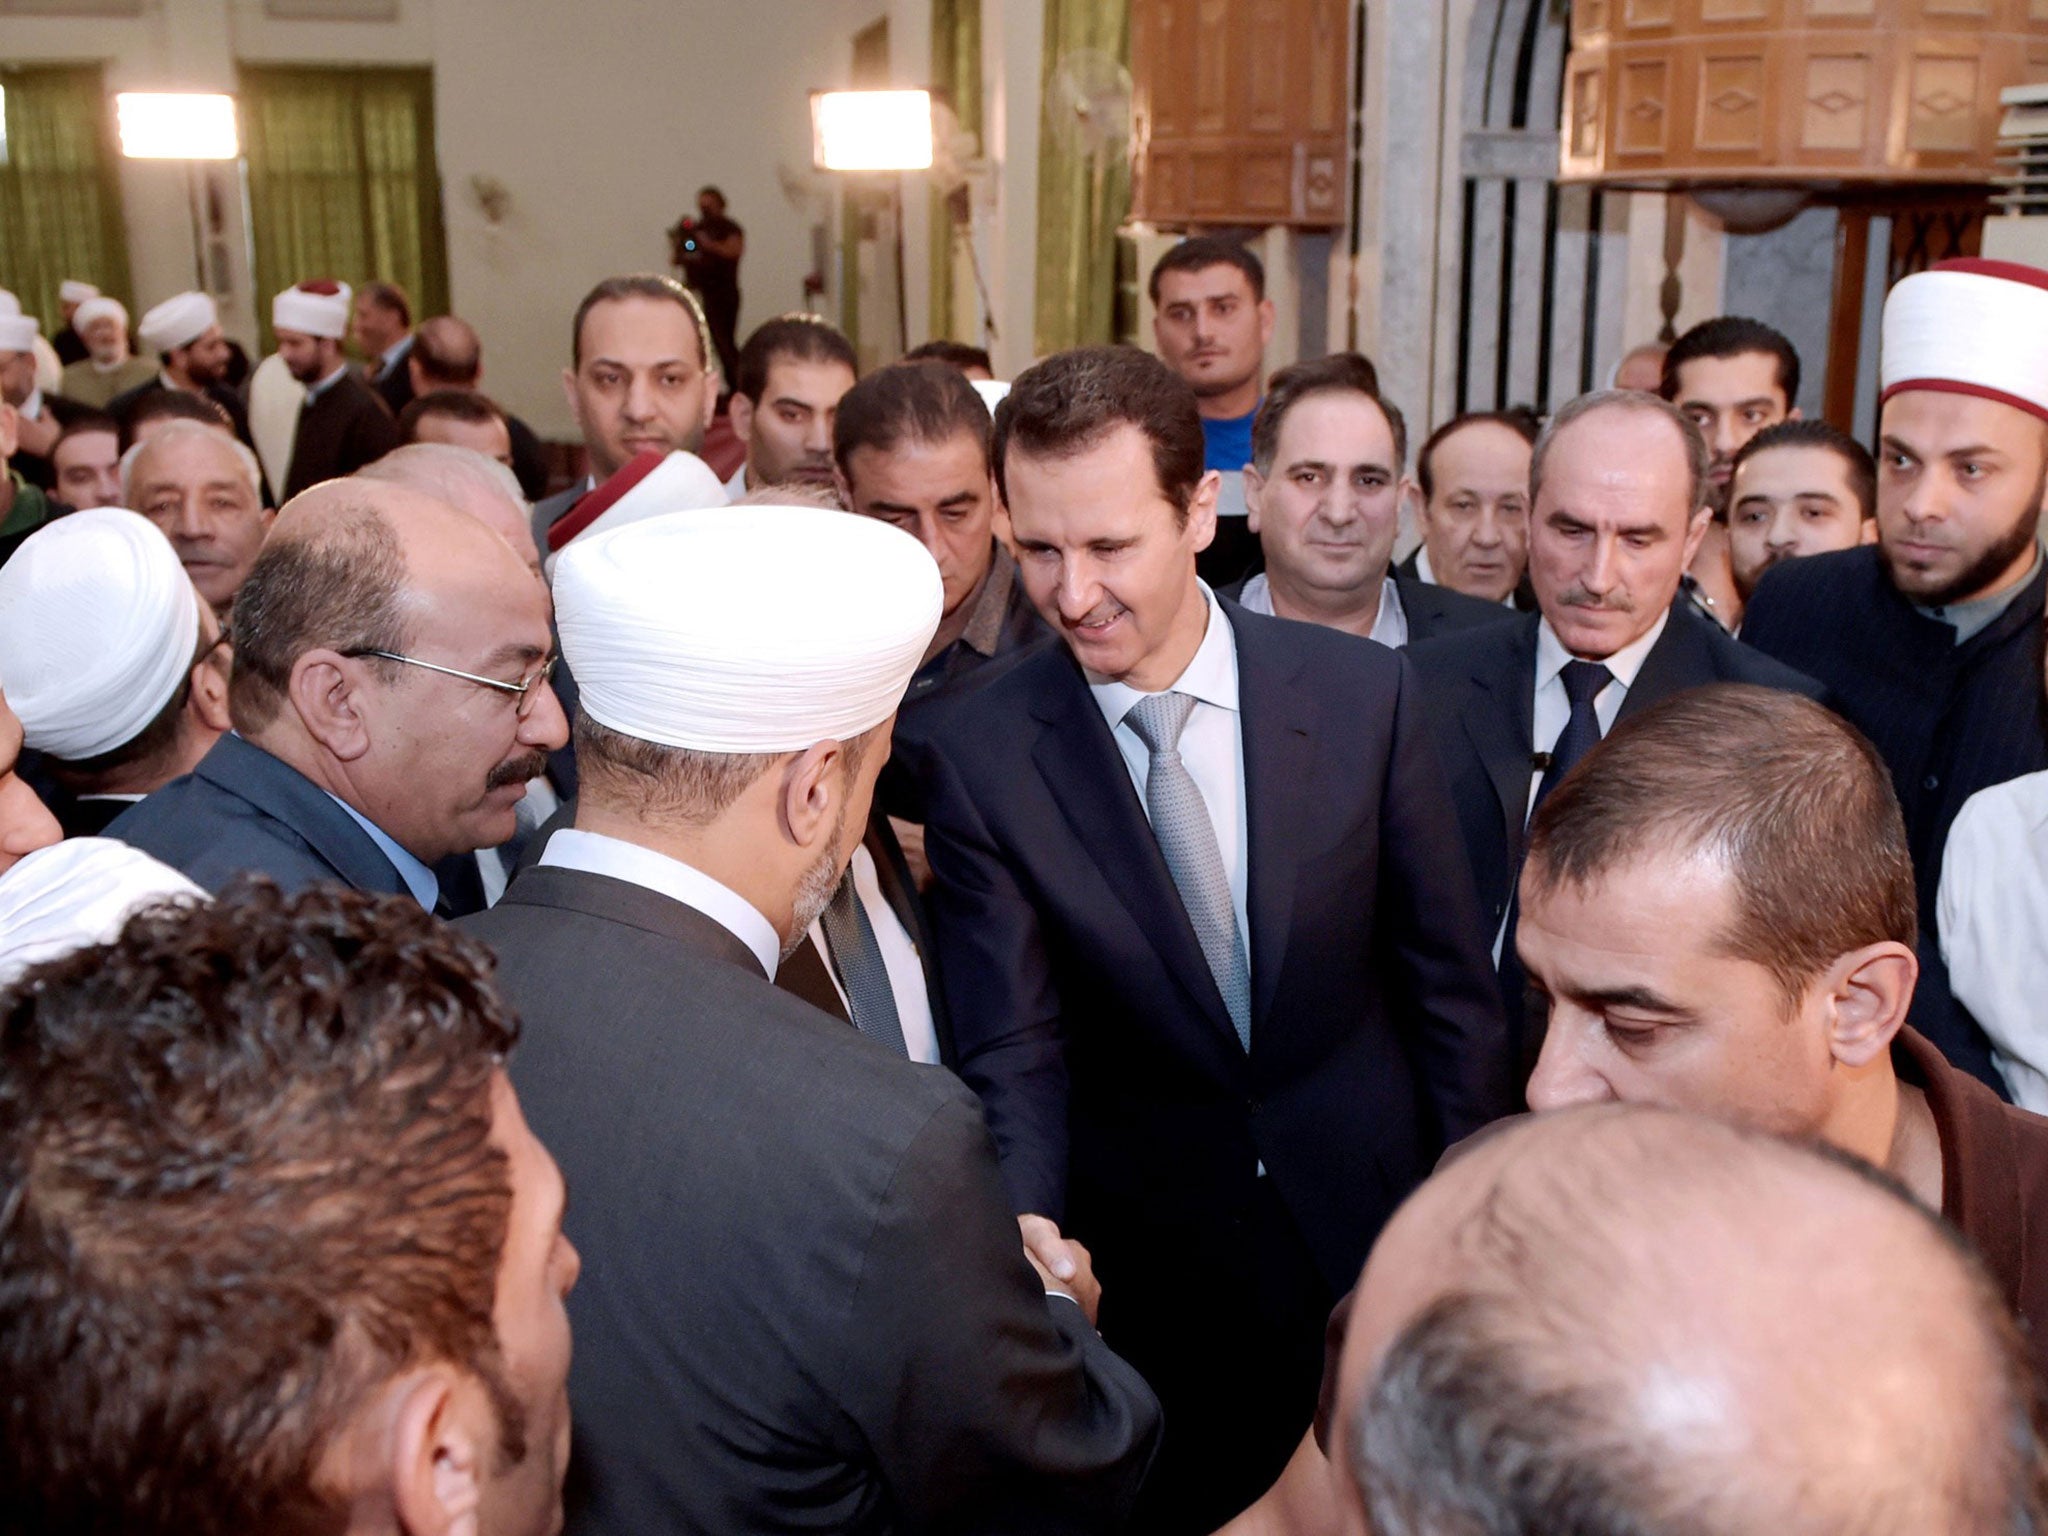 President Assad greets worshippers after the morning prayer to mark the Muslim holiday of Eid al-Adha at the Al-Adel mosque in Damascus, in one of his rare public appearances